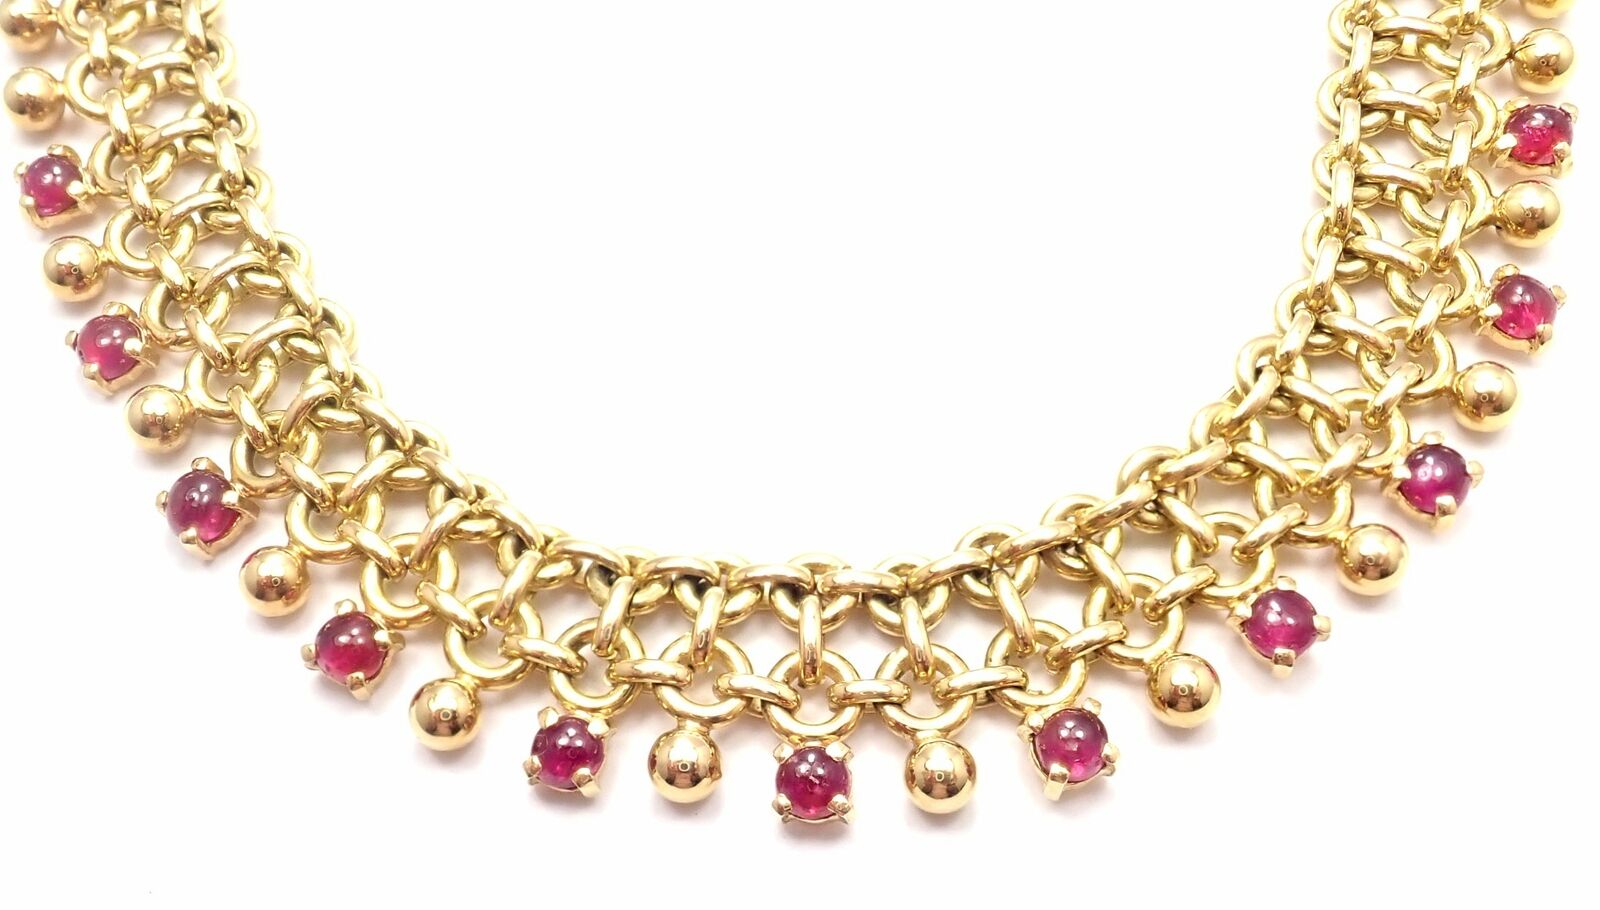 Tiffany & Co. Jewelry & Watches:Fine Jewelry:Necklaces & Pendants Rare! Vintage Authentic Tiffany & Co 18k Yellow Gold Ruby Collar Necklace